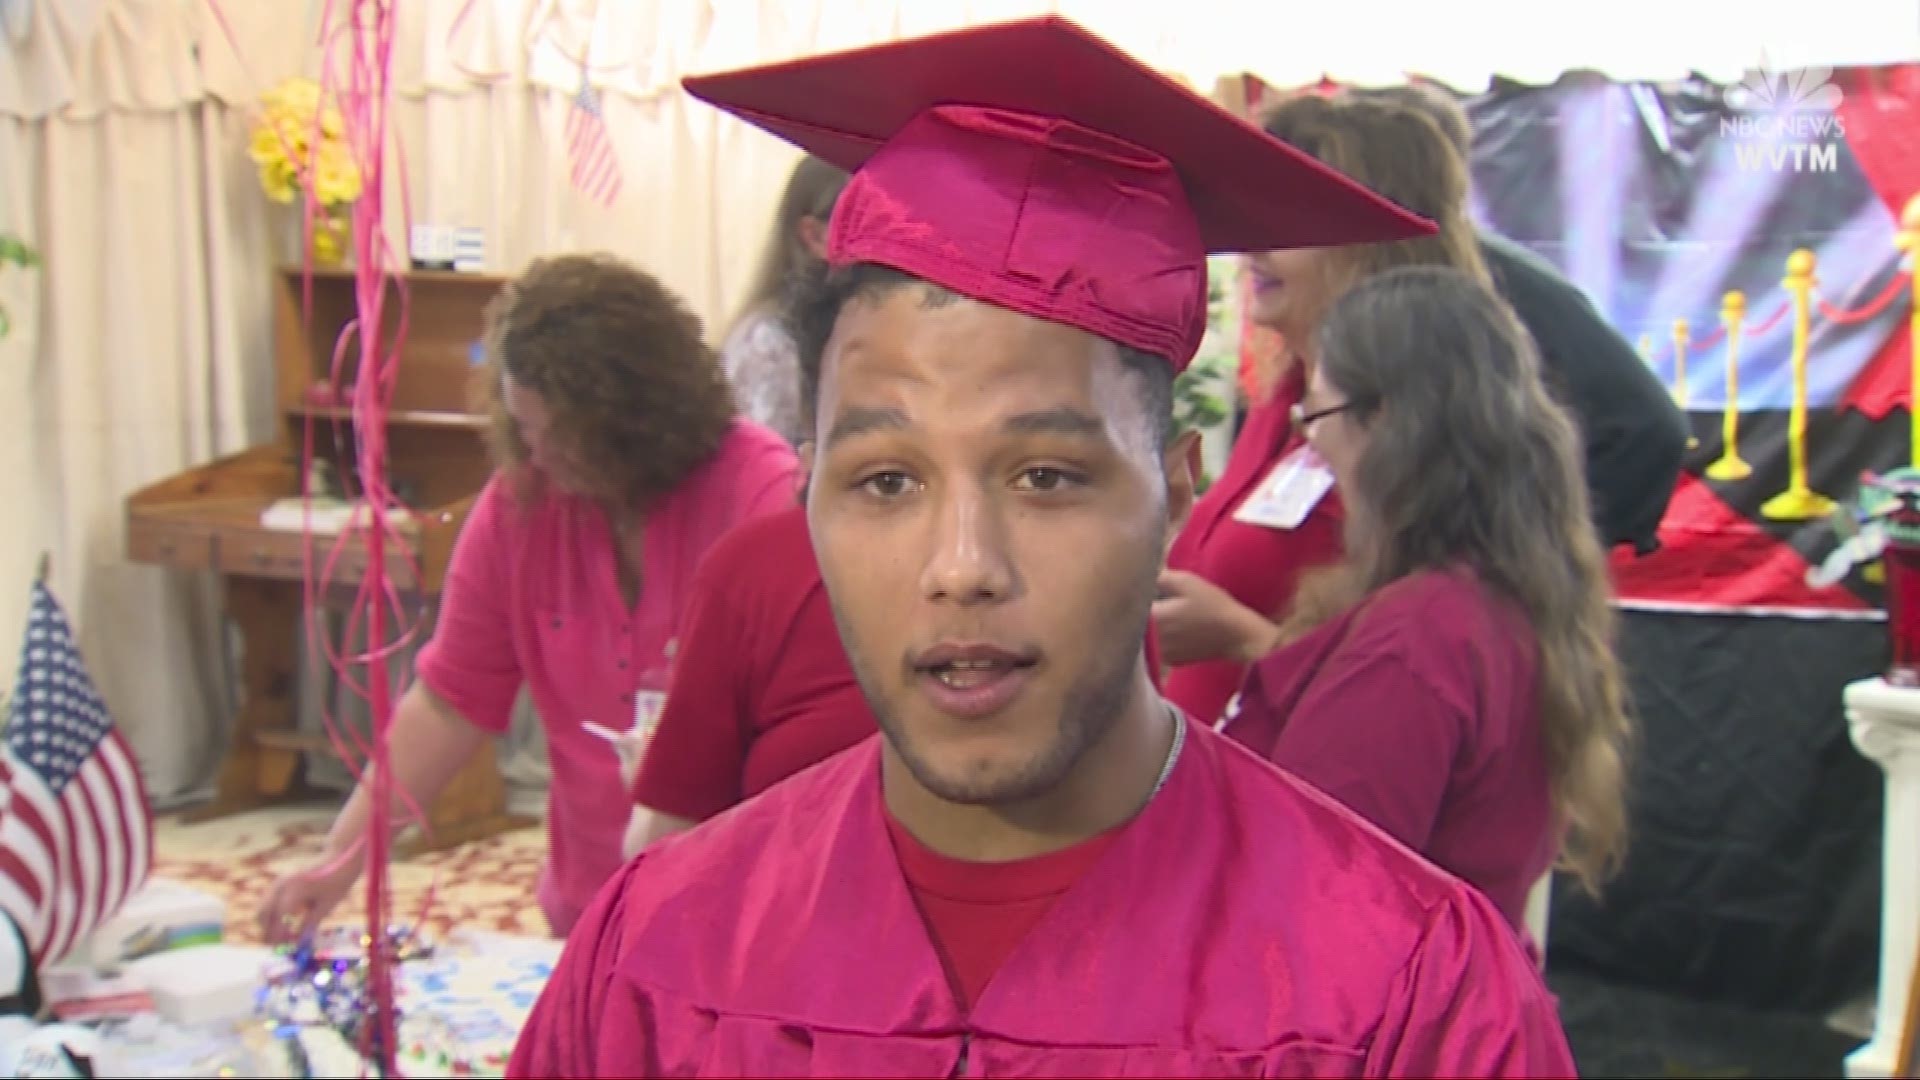 An Alabama teen who missed his own high school graduation due to work commitments and car trouble gets a big surprise after his coworkers learn what happened.